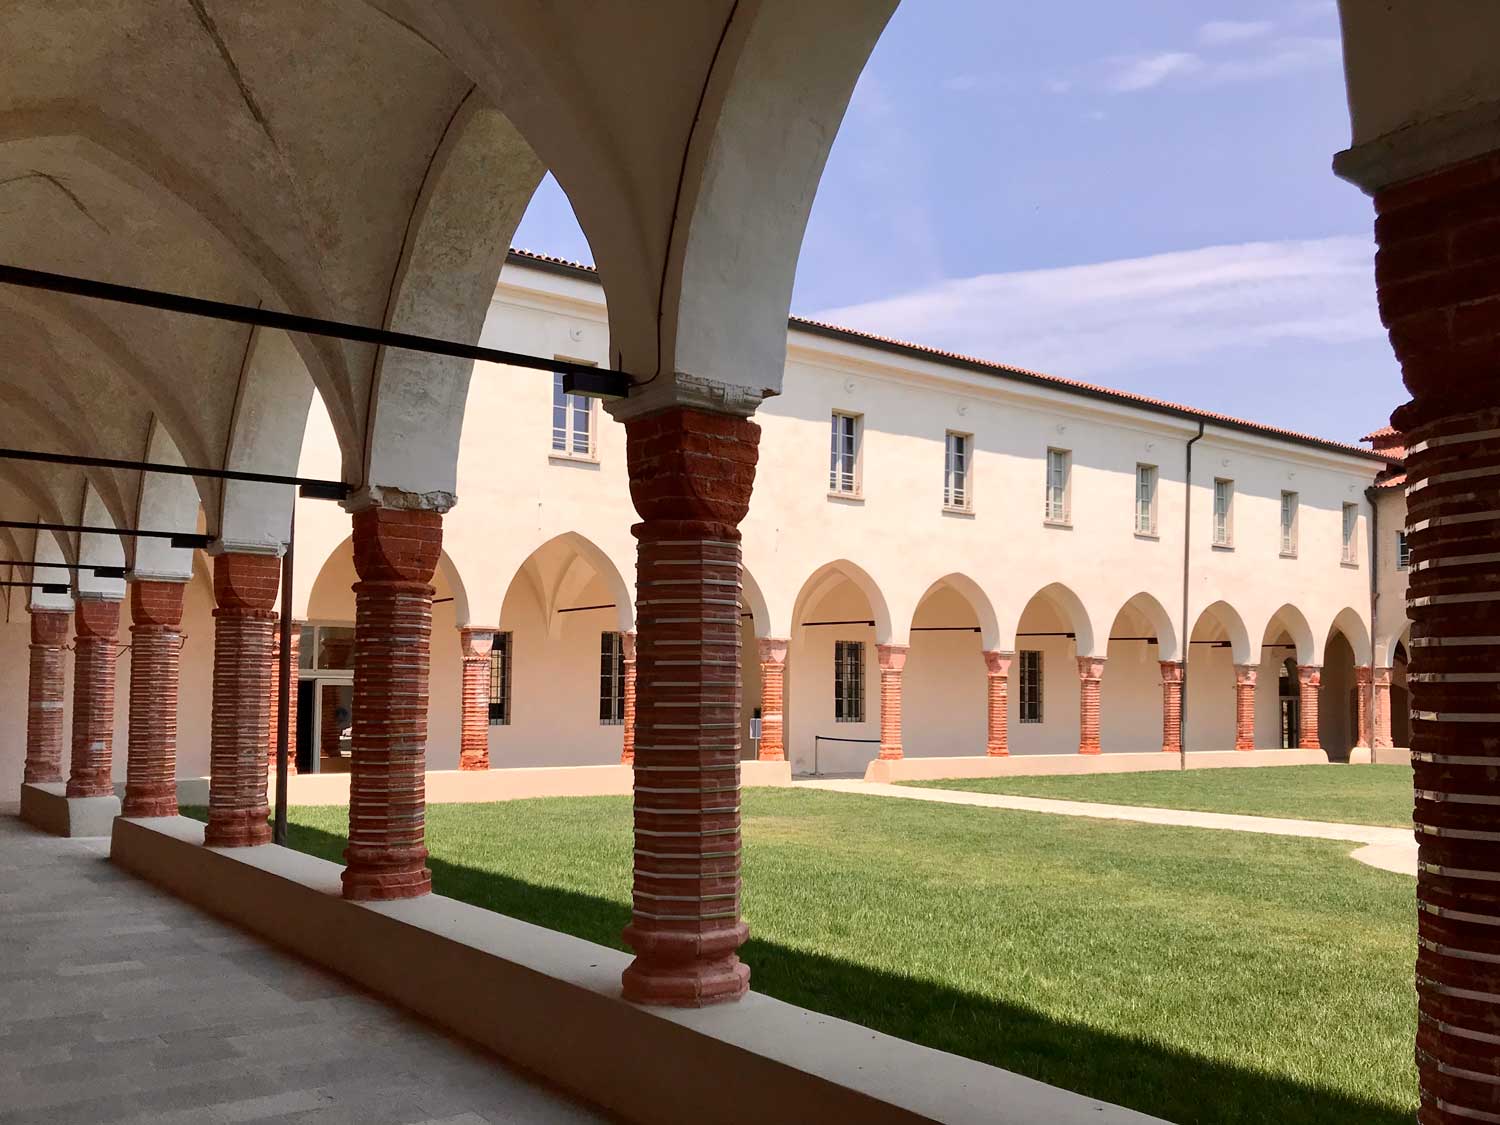 The new campus of the Catholic University in Cremona: a separate but permeable microcosm